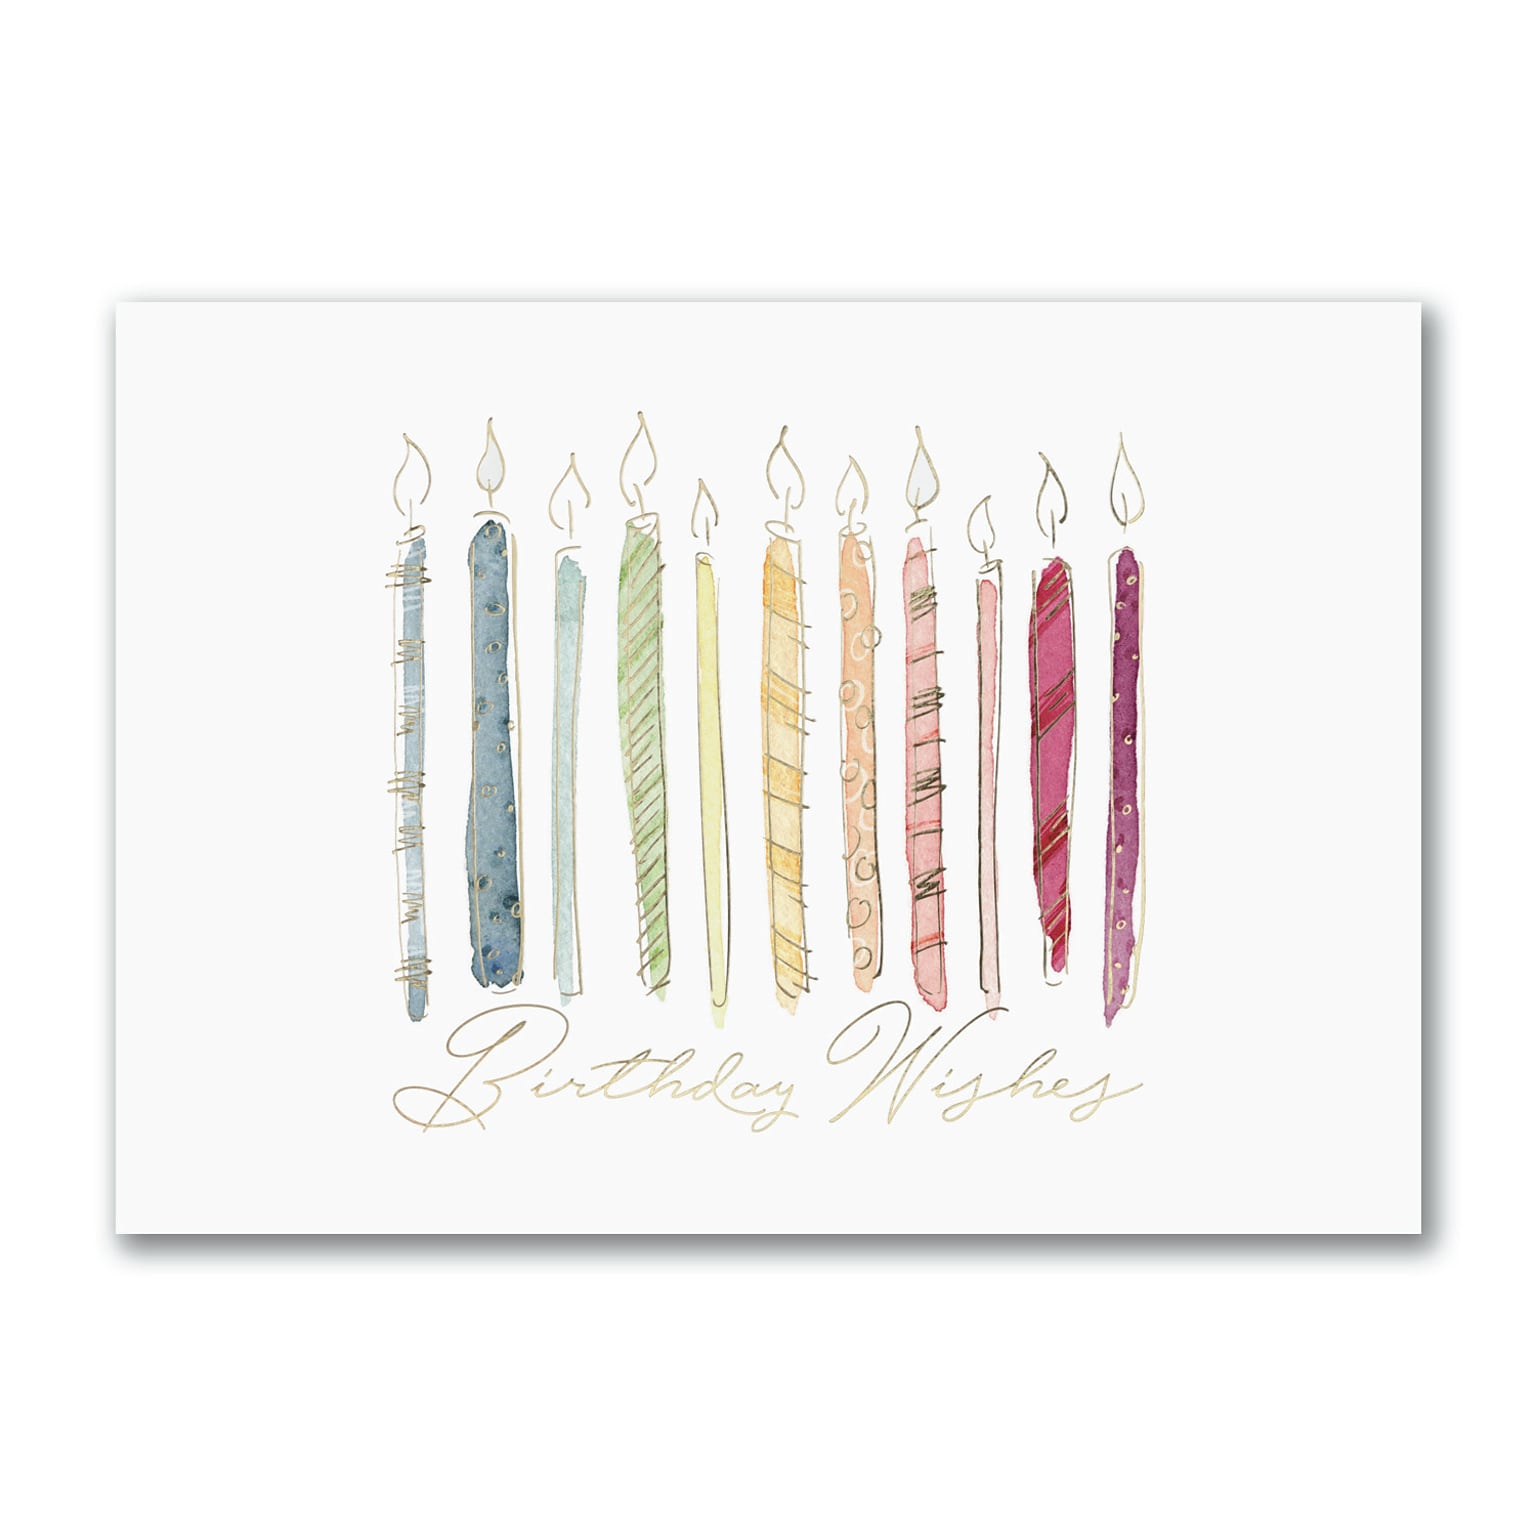 Custom Birthday Candle Wishes Cards, With Envelopes, 7-7/8 x 5-5/8, 25 Cards per Set